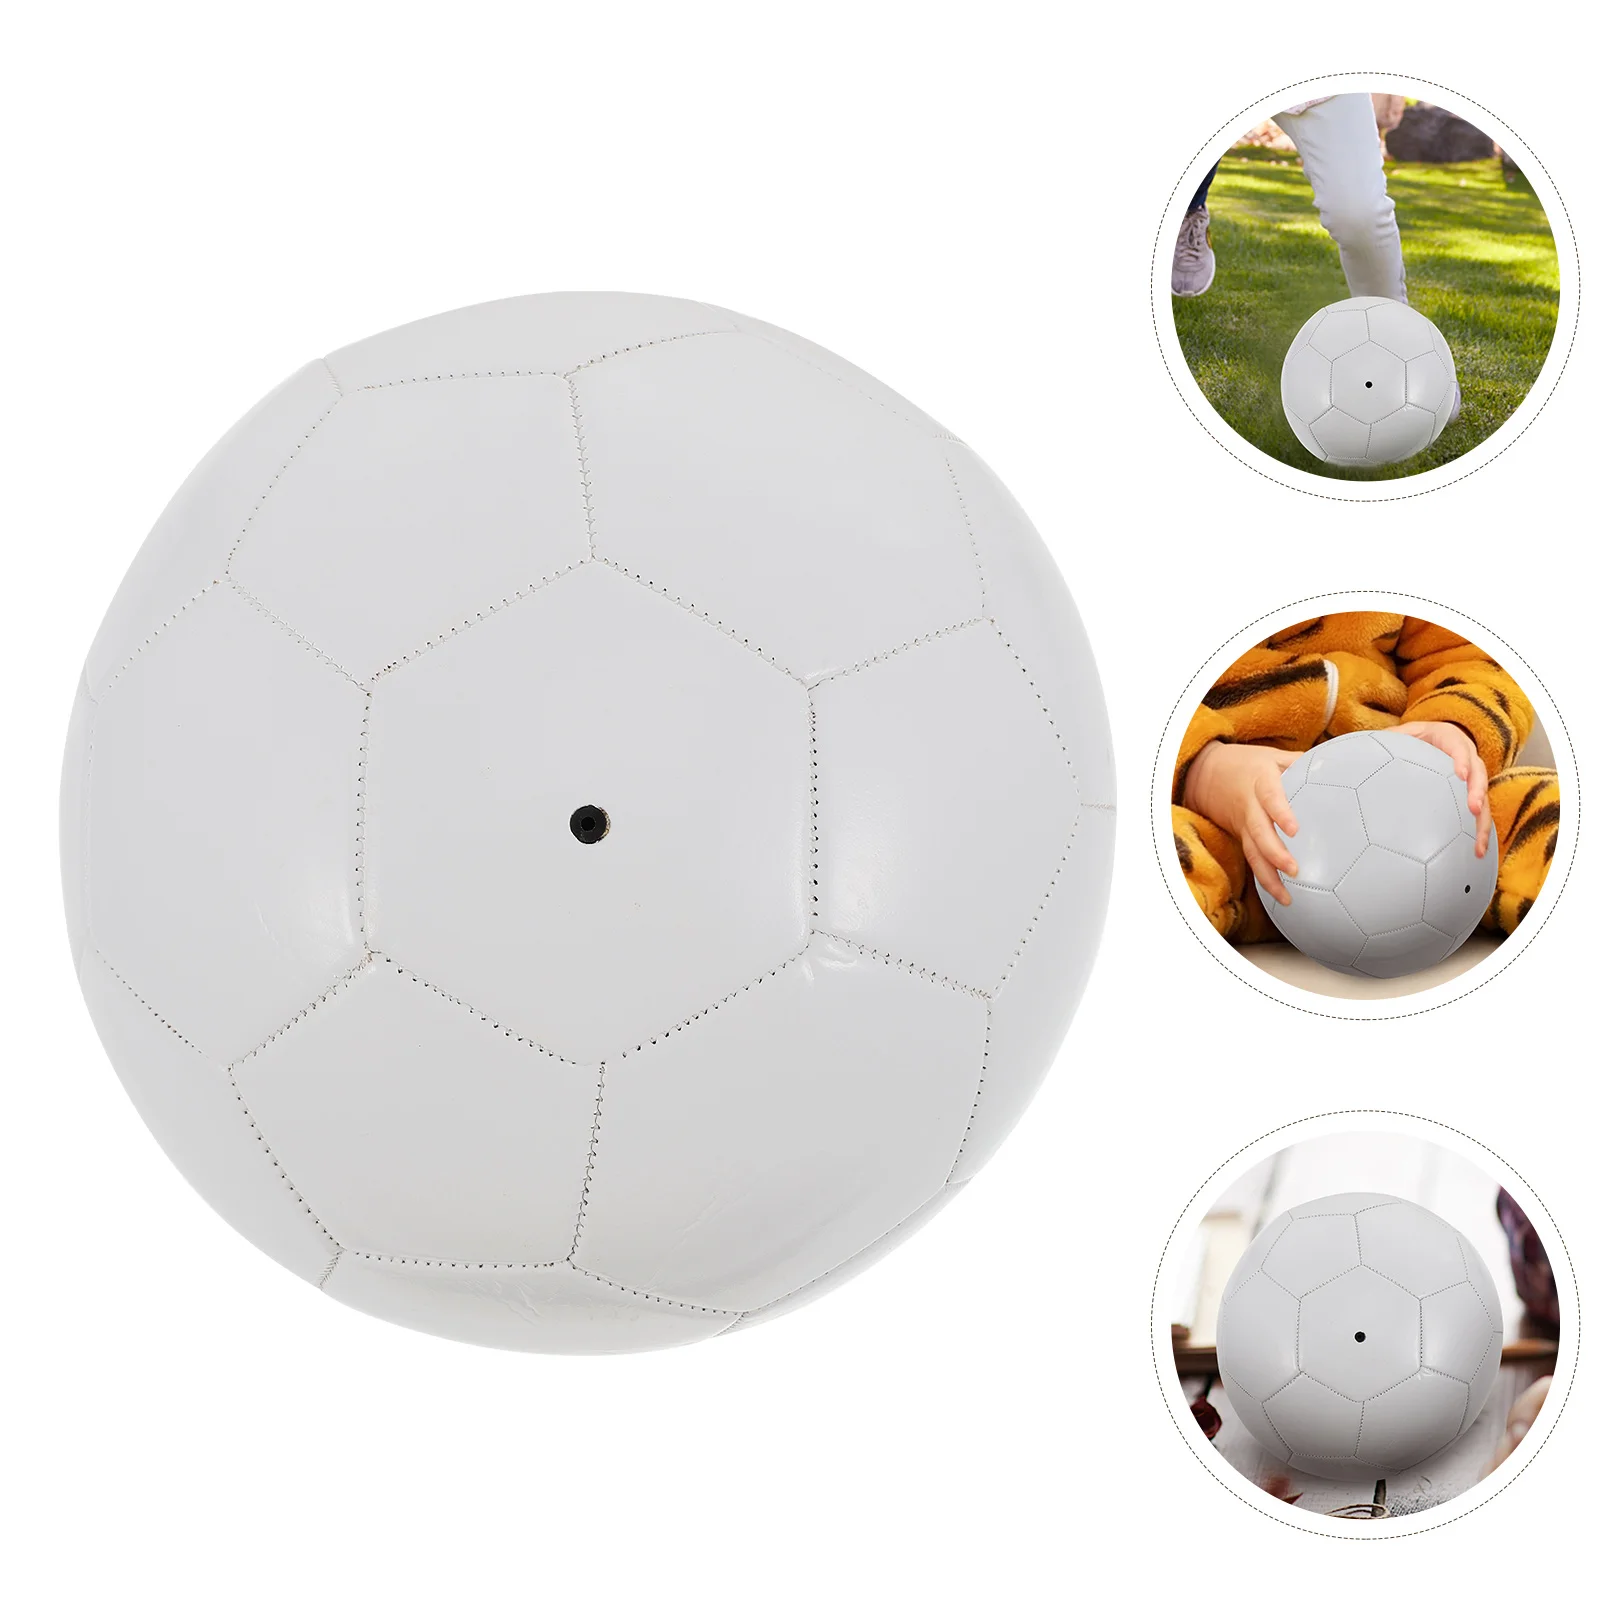 

Football Soccer Match White Diy Training Sports Blank Light Up Team Wear Resistant Practice Educational Signable Toddlers Kick